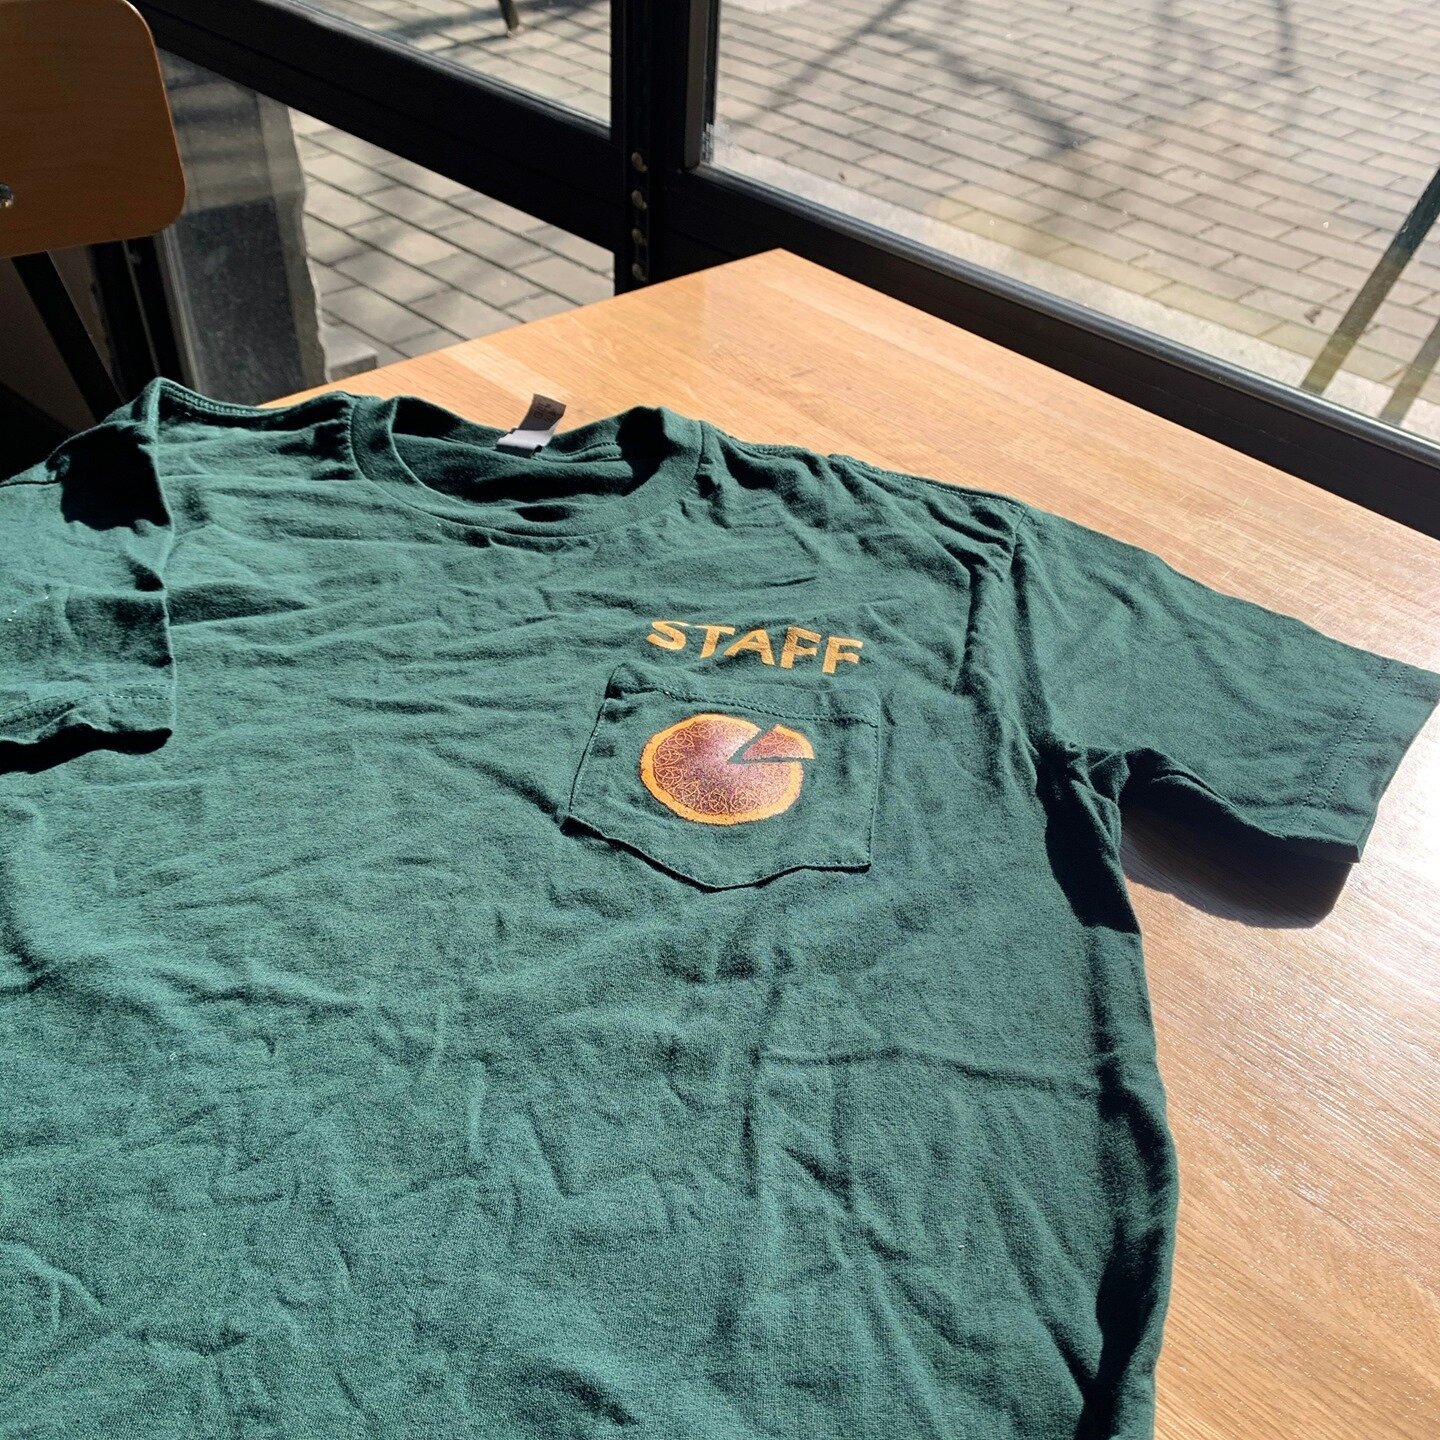 Here we are. One year later.⠀
------------------------⠀
Remember @bow.market festival days? Last year, we were so excited to throw a Pie-themed St Patrick's Day for 3/14. That day has come and gone. These staff shirts got handed out, but we never got